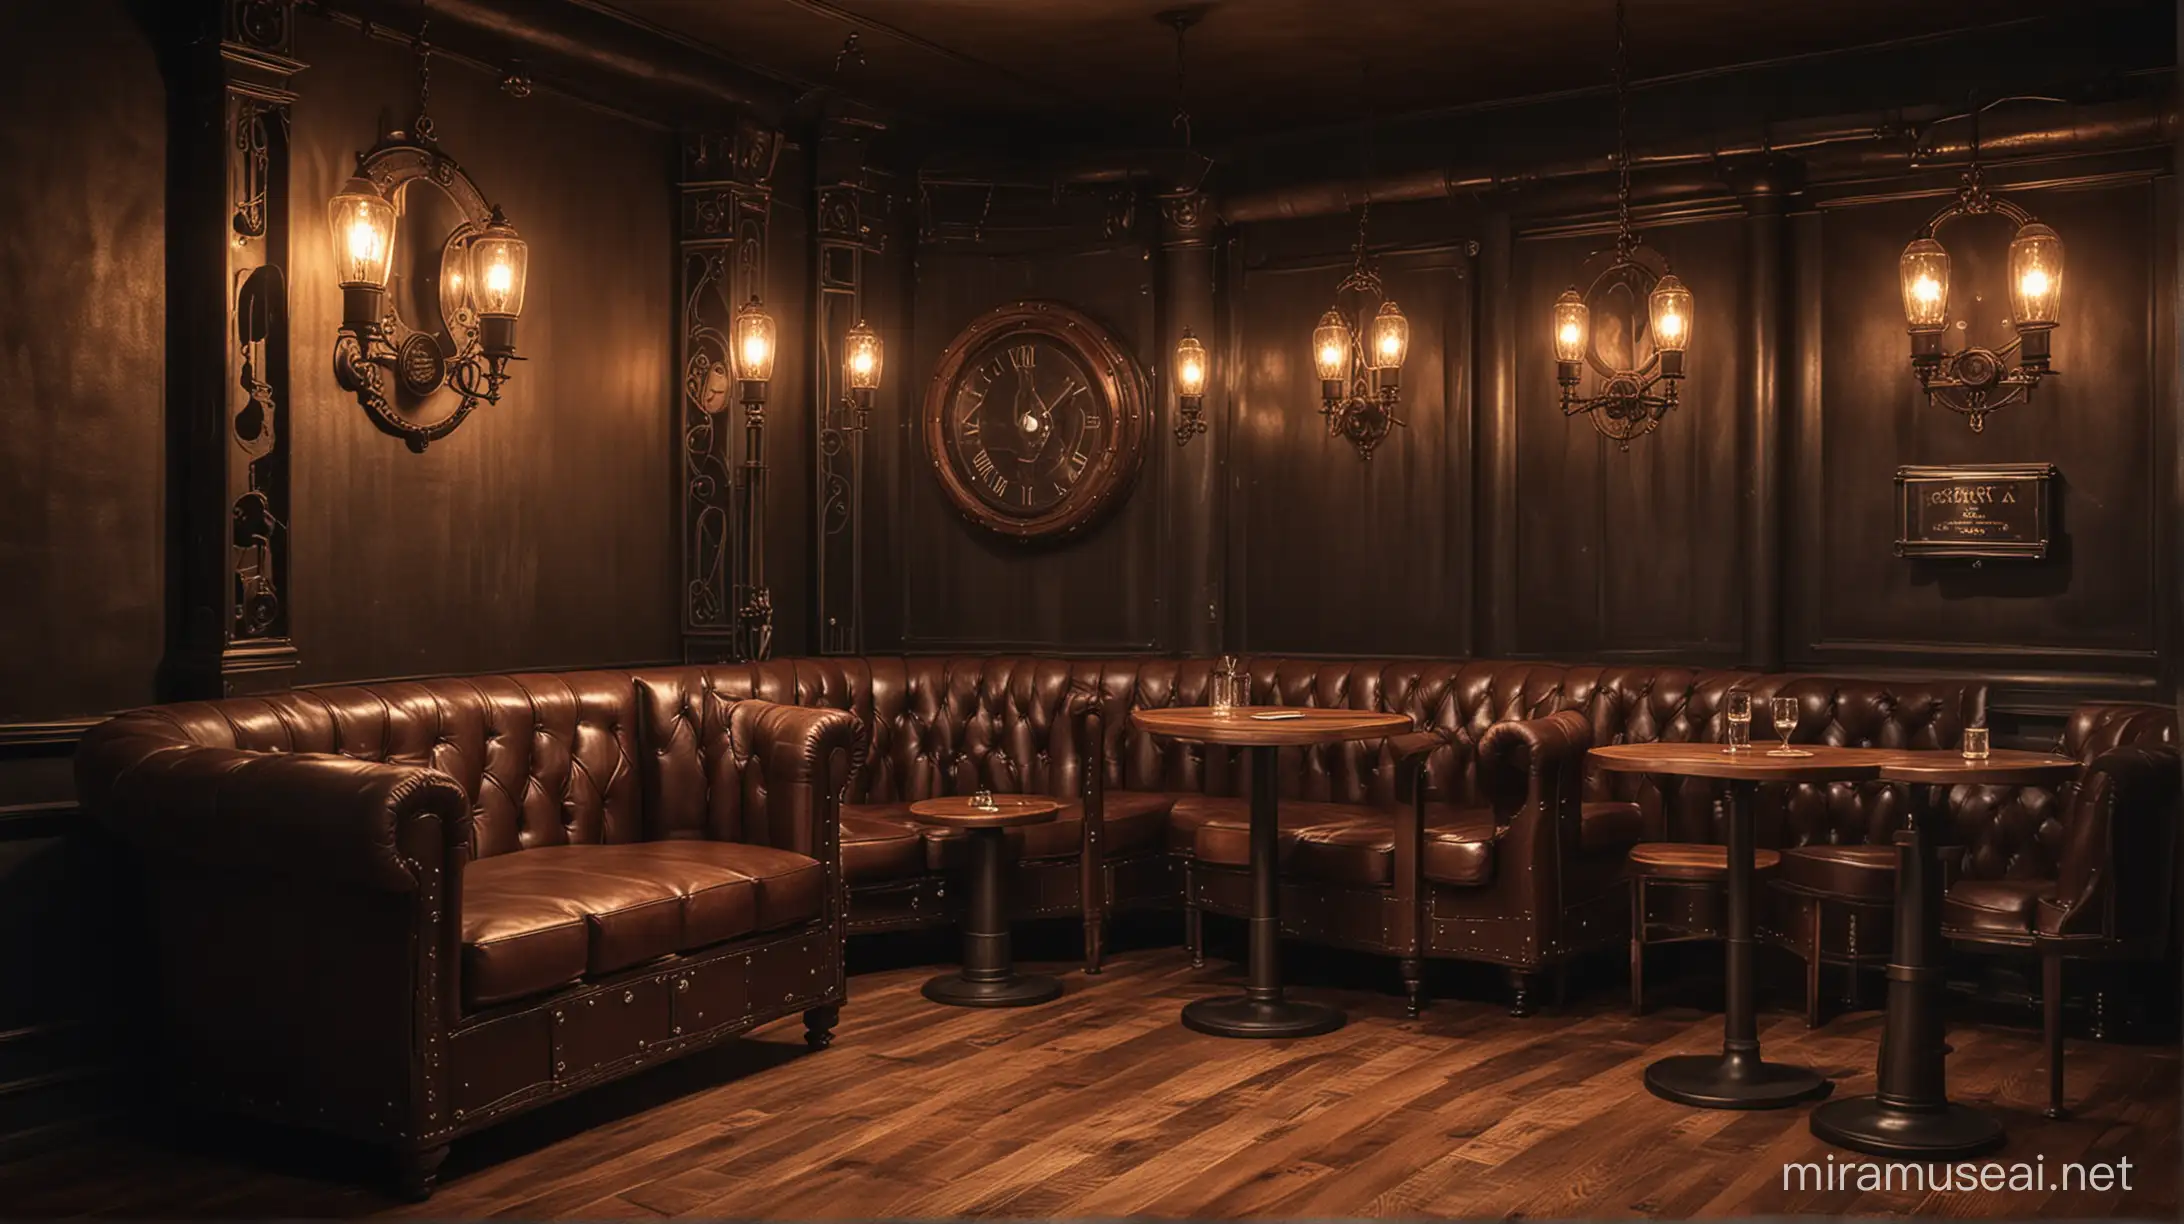 Exlcusive steampunk gentelmen club, furniture made of leather and wood, stylish lamps and small round tables, rather dark, subtle lighting